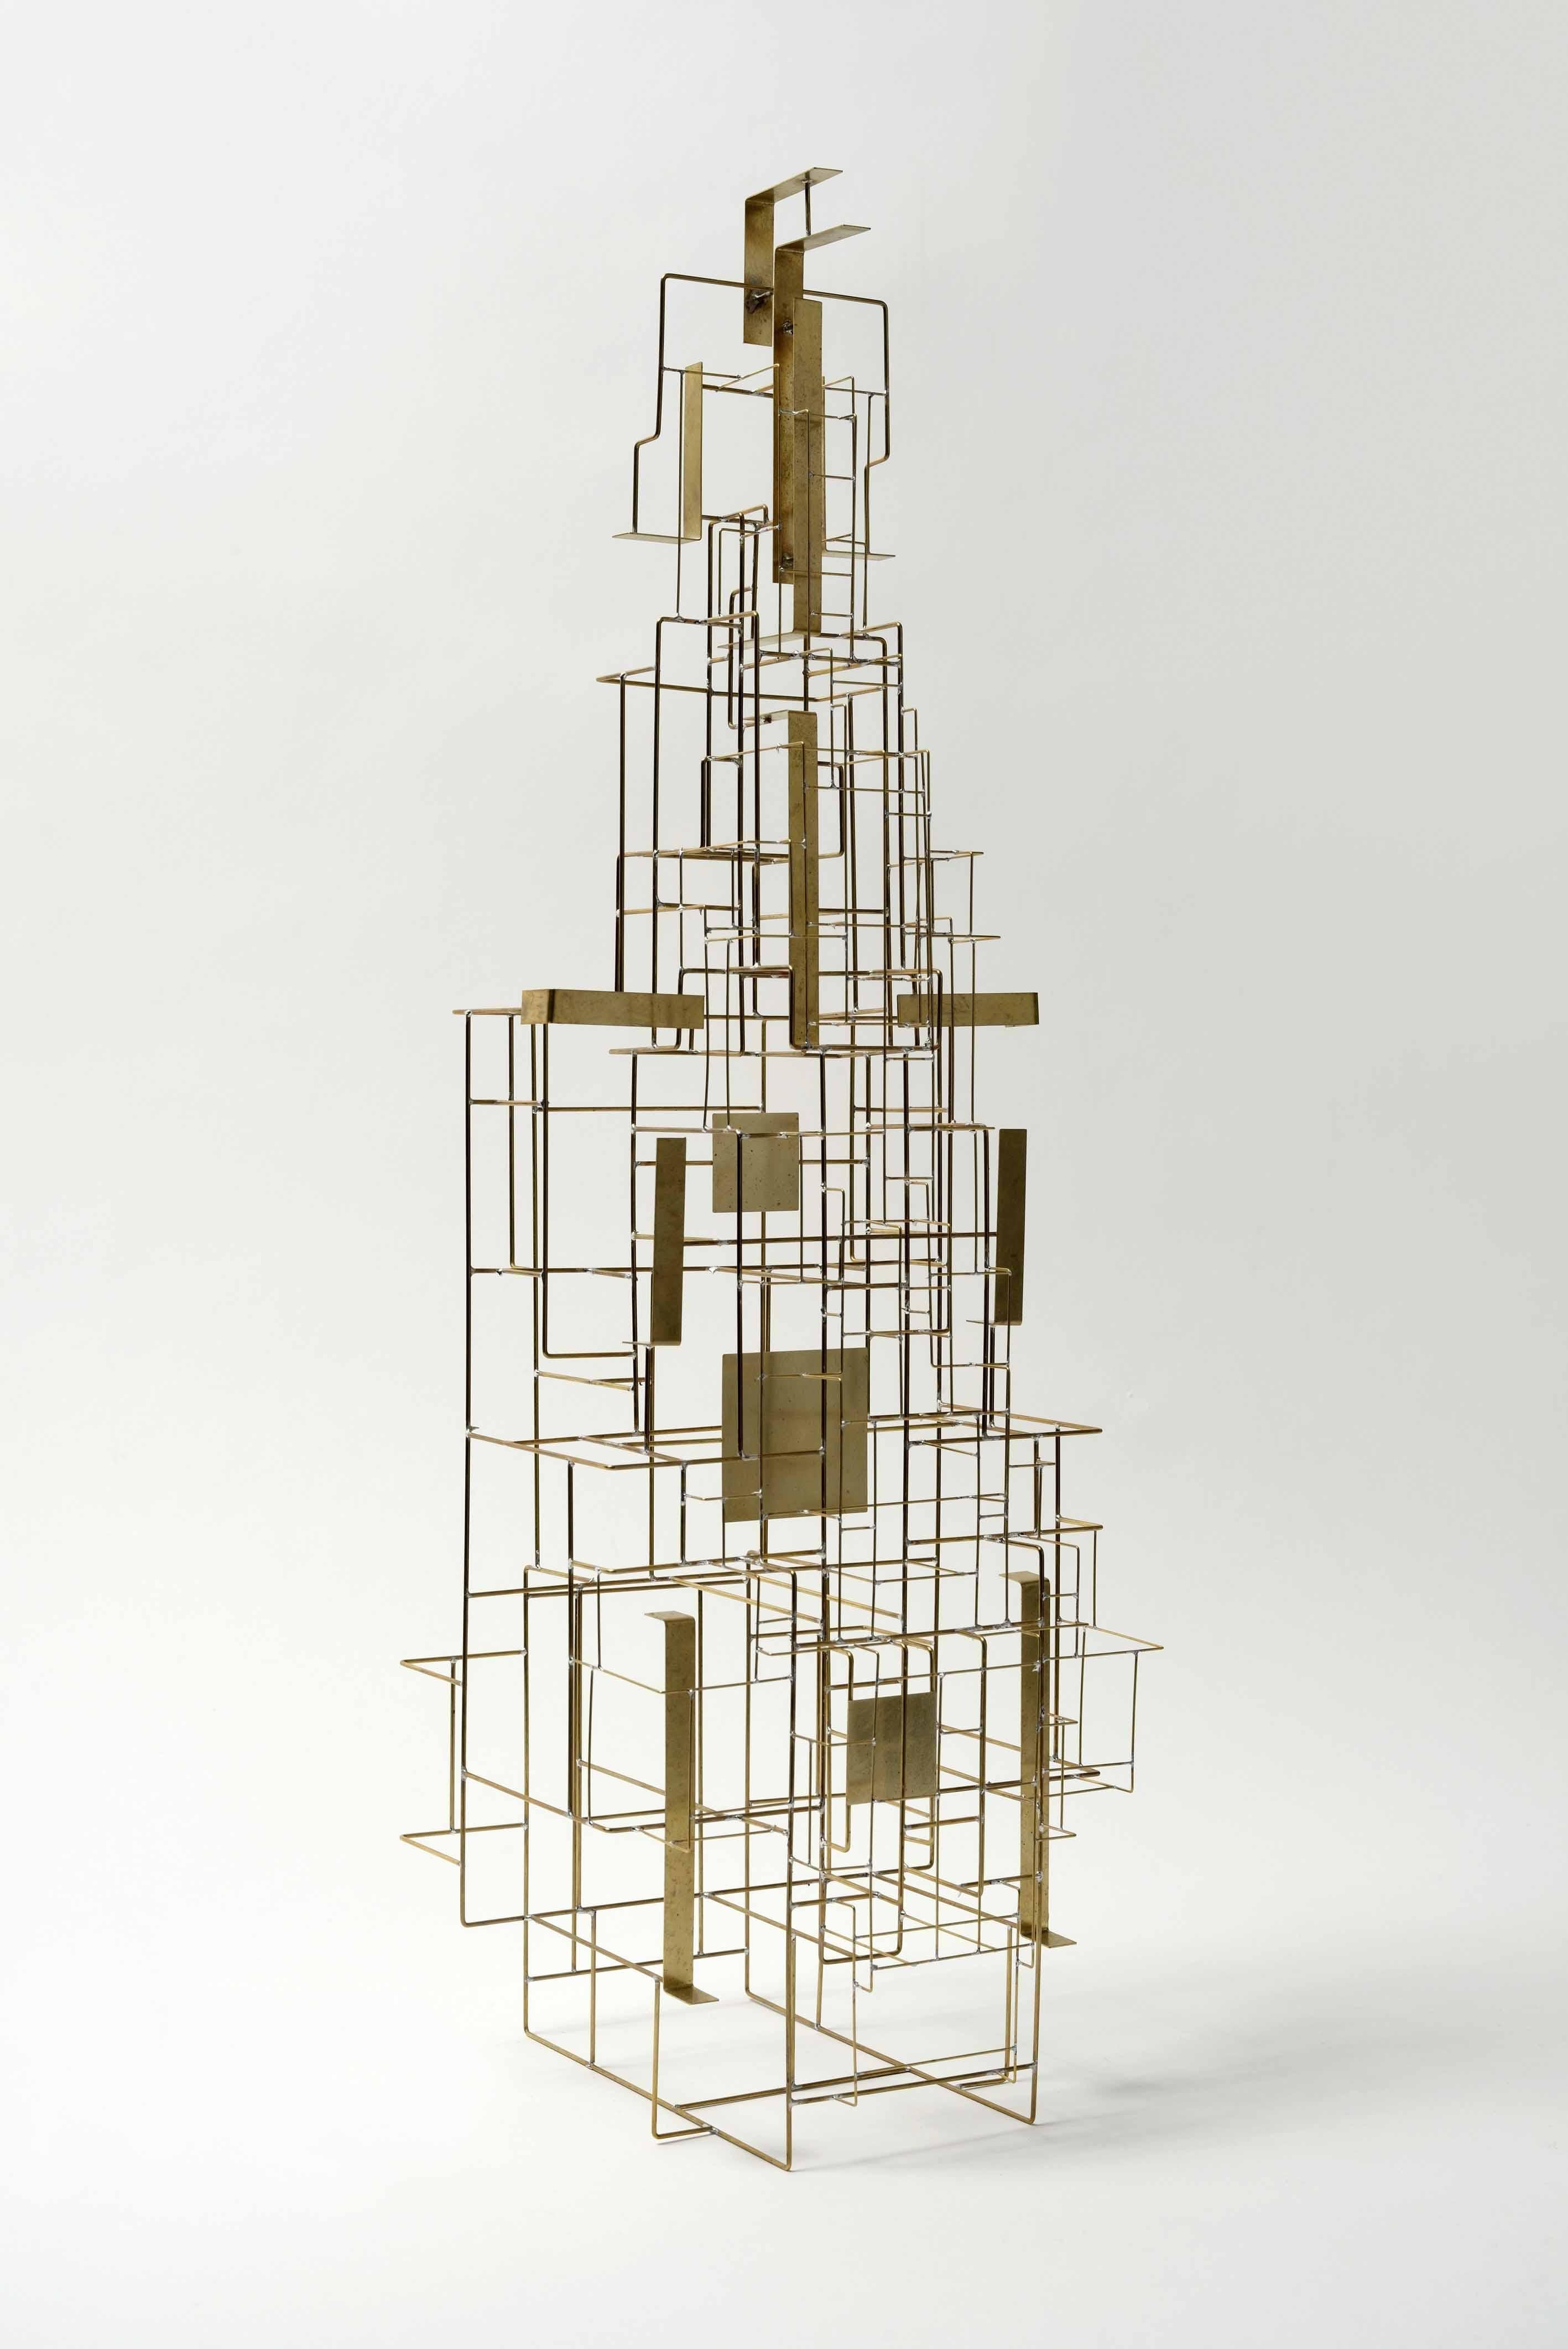 Building was created in 2018 by French designer Eric de Dormael. Handcrafted in brass, this is a unique piece.
Éric de Dormael is an unconventional artist, his trajectory far from the beaten track. Trained at the Saint-Luc school in Tournai and at